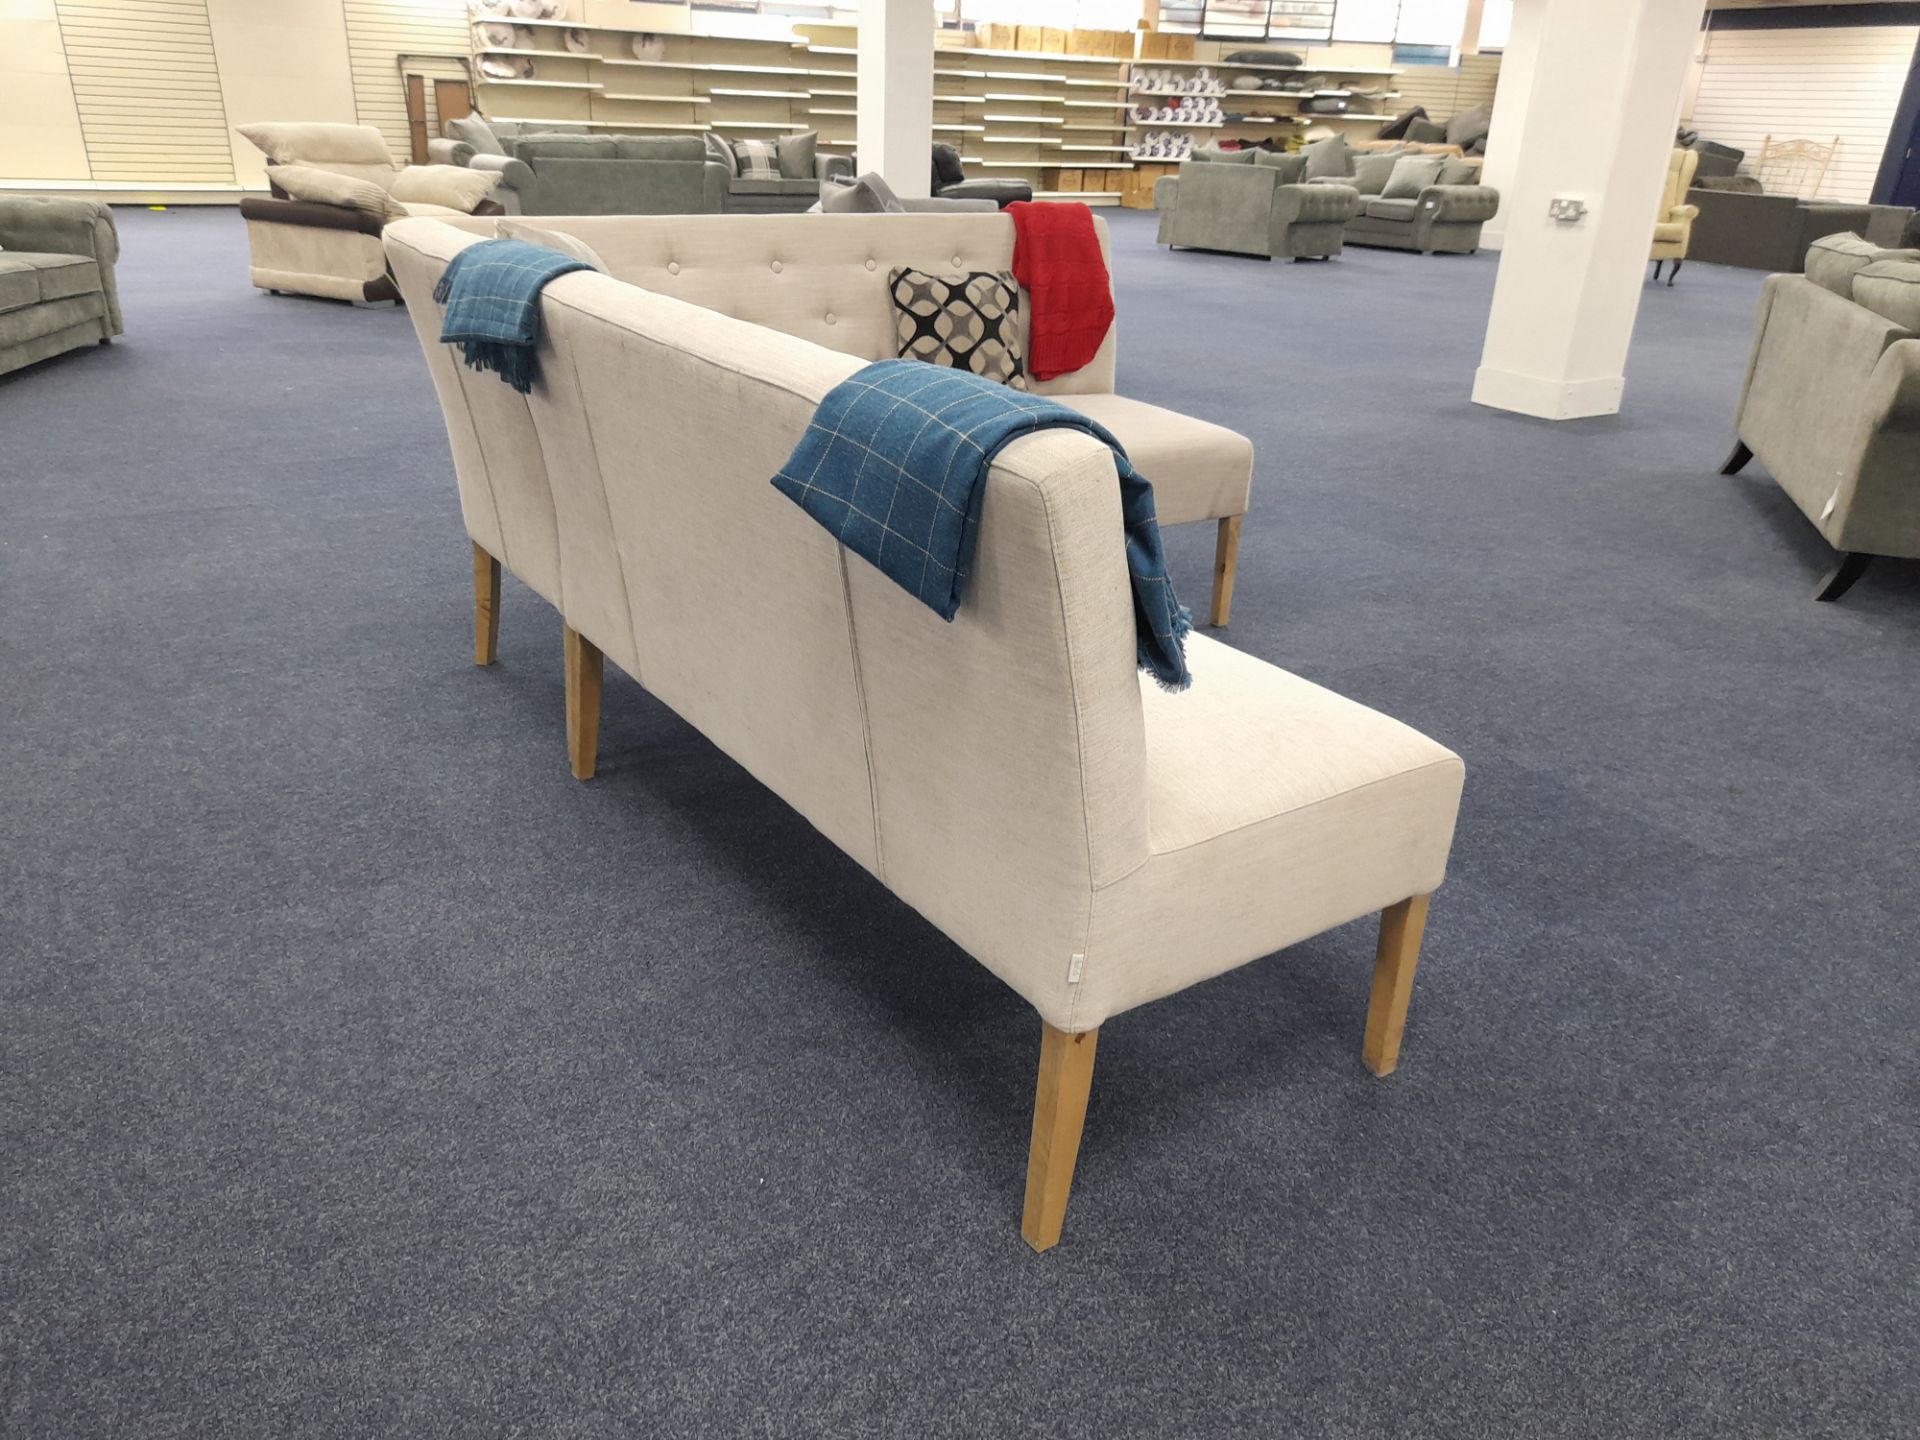 Two section/5 seat cream fabric upholstered bench type corner seating unit (Ex Display) - Image 5 of 6